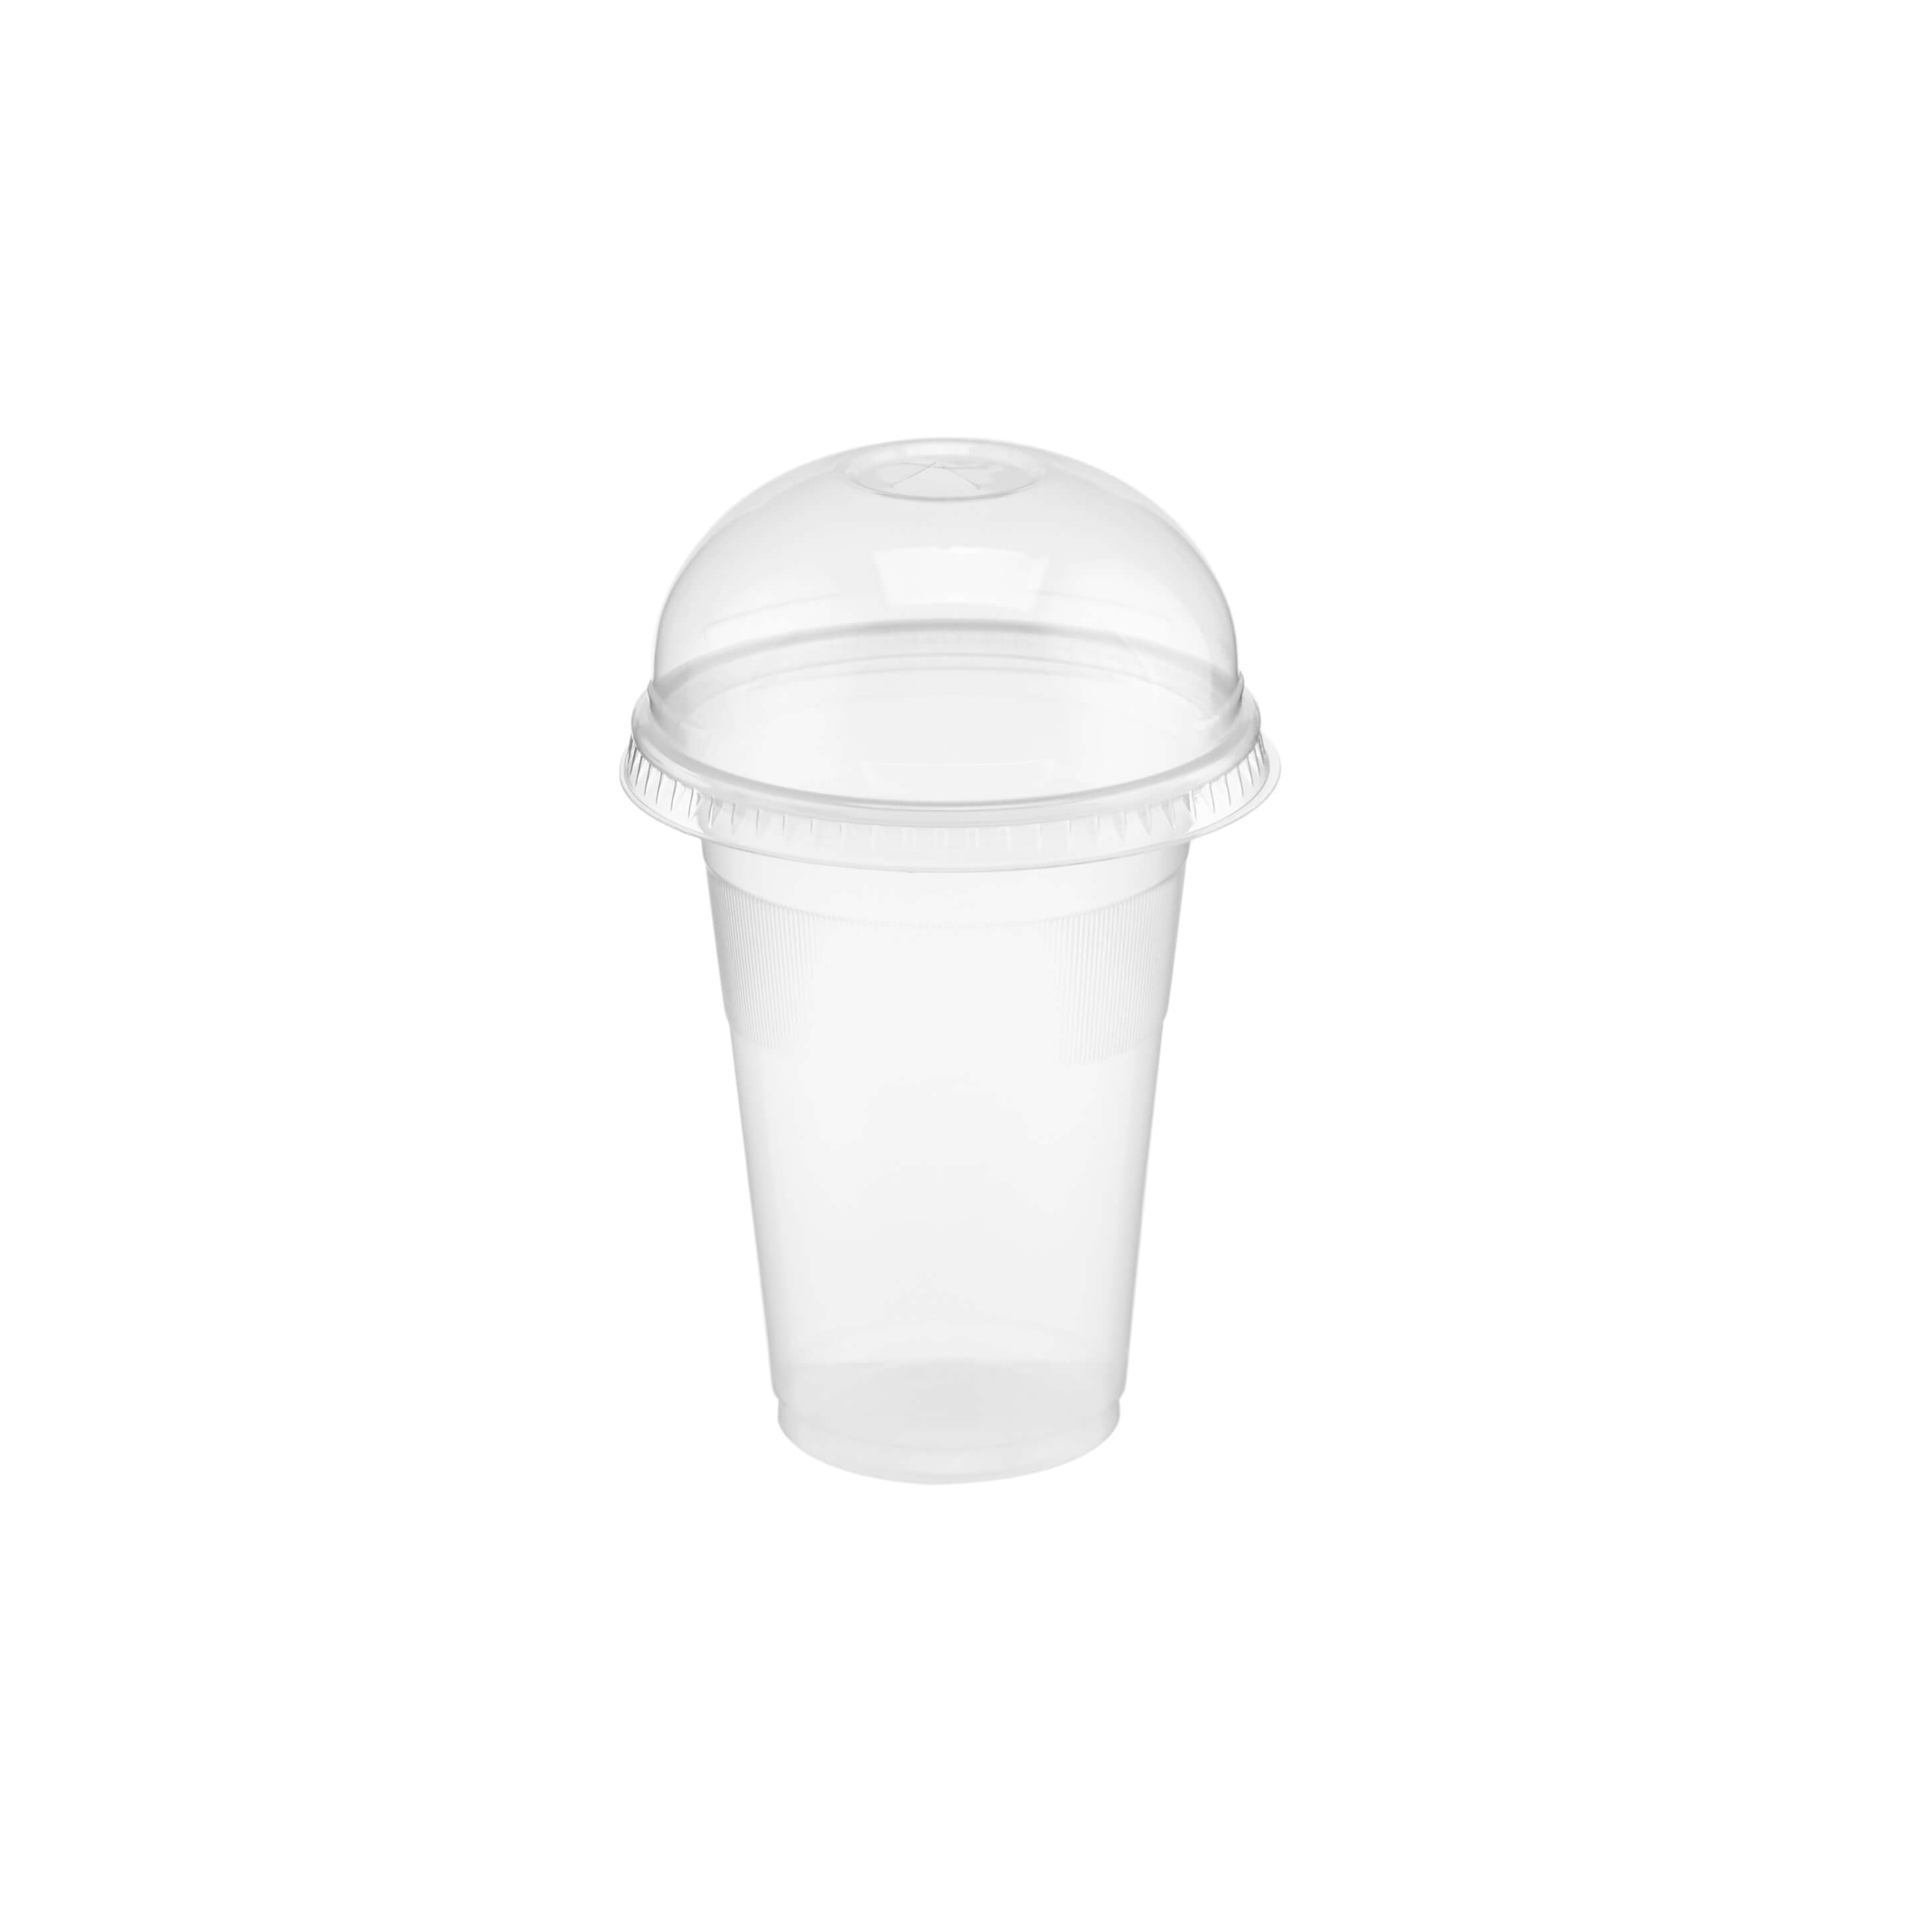 12 Oz Clear Plastic PP Cup with dome lid- Hotpack Global